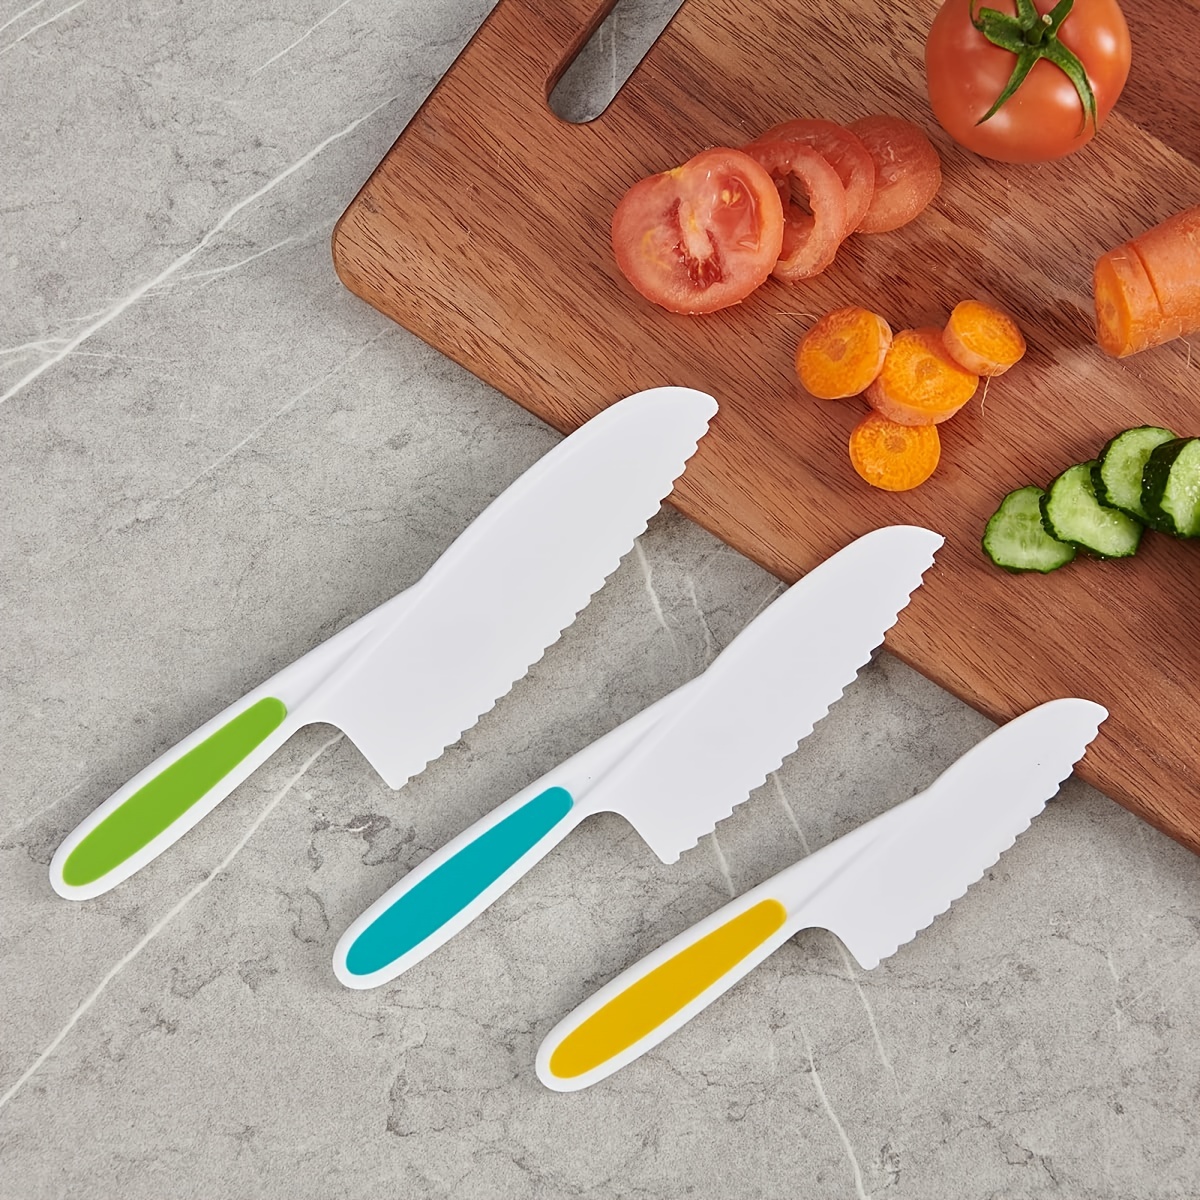 3pcs Kids Kitchen Knife, Plastic Serrated Edges Kids Knife Set For Cooking  And Cutting Cakes, Fruits And Veggies, Perfectly Safe For Kids Toddler Chef  Knife Set For Kids Real Cooking